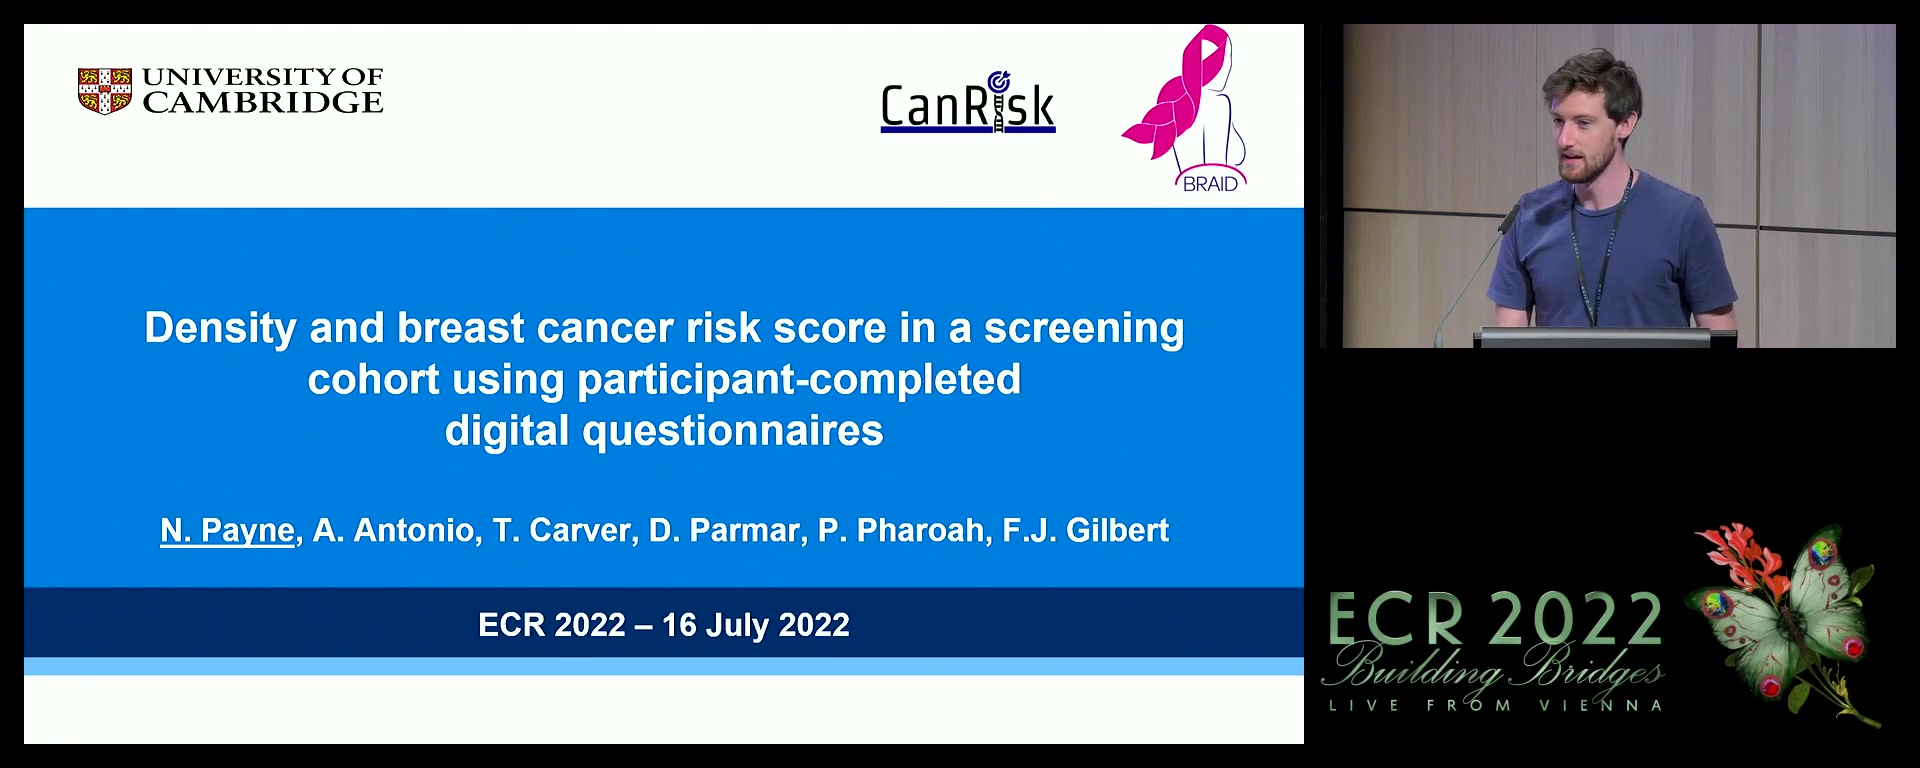 Density and breast cancer risk score in a screening cohort using participant-completed digital questionnaires